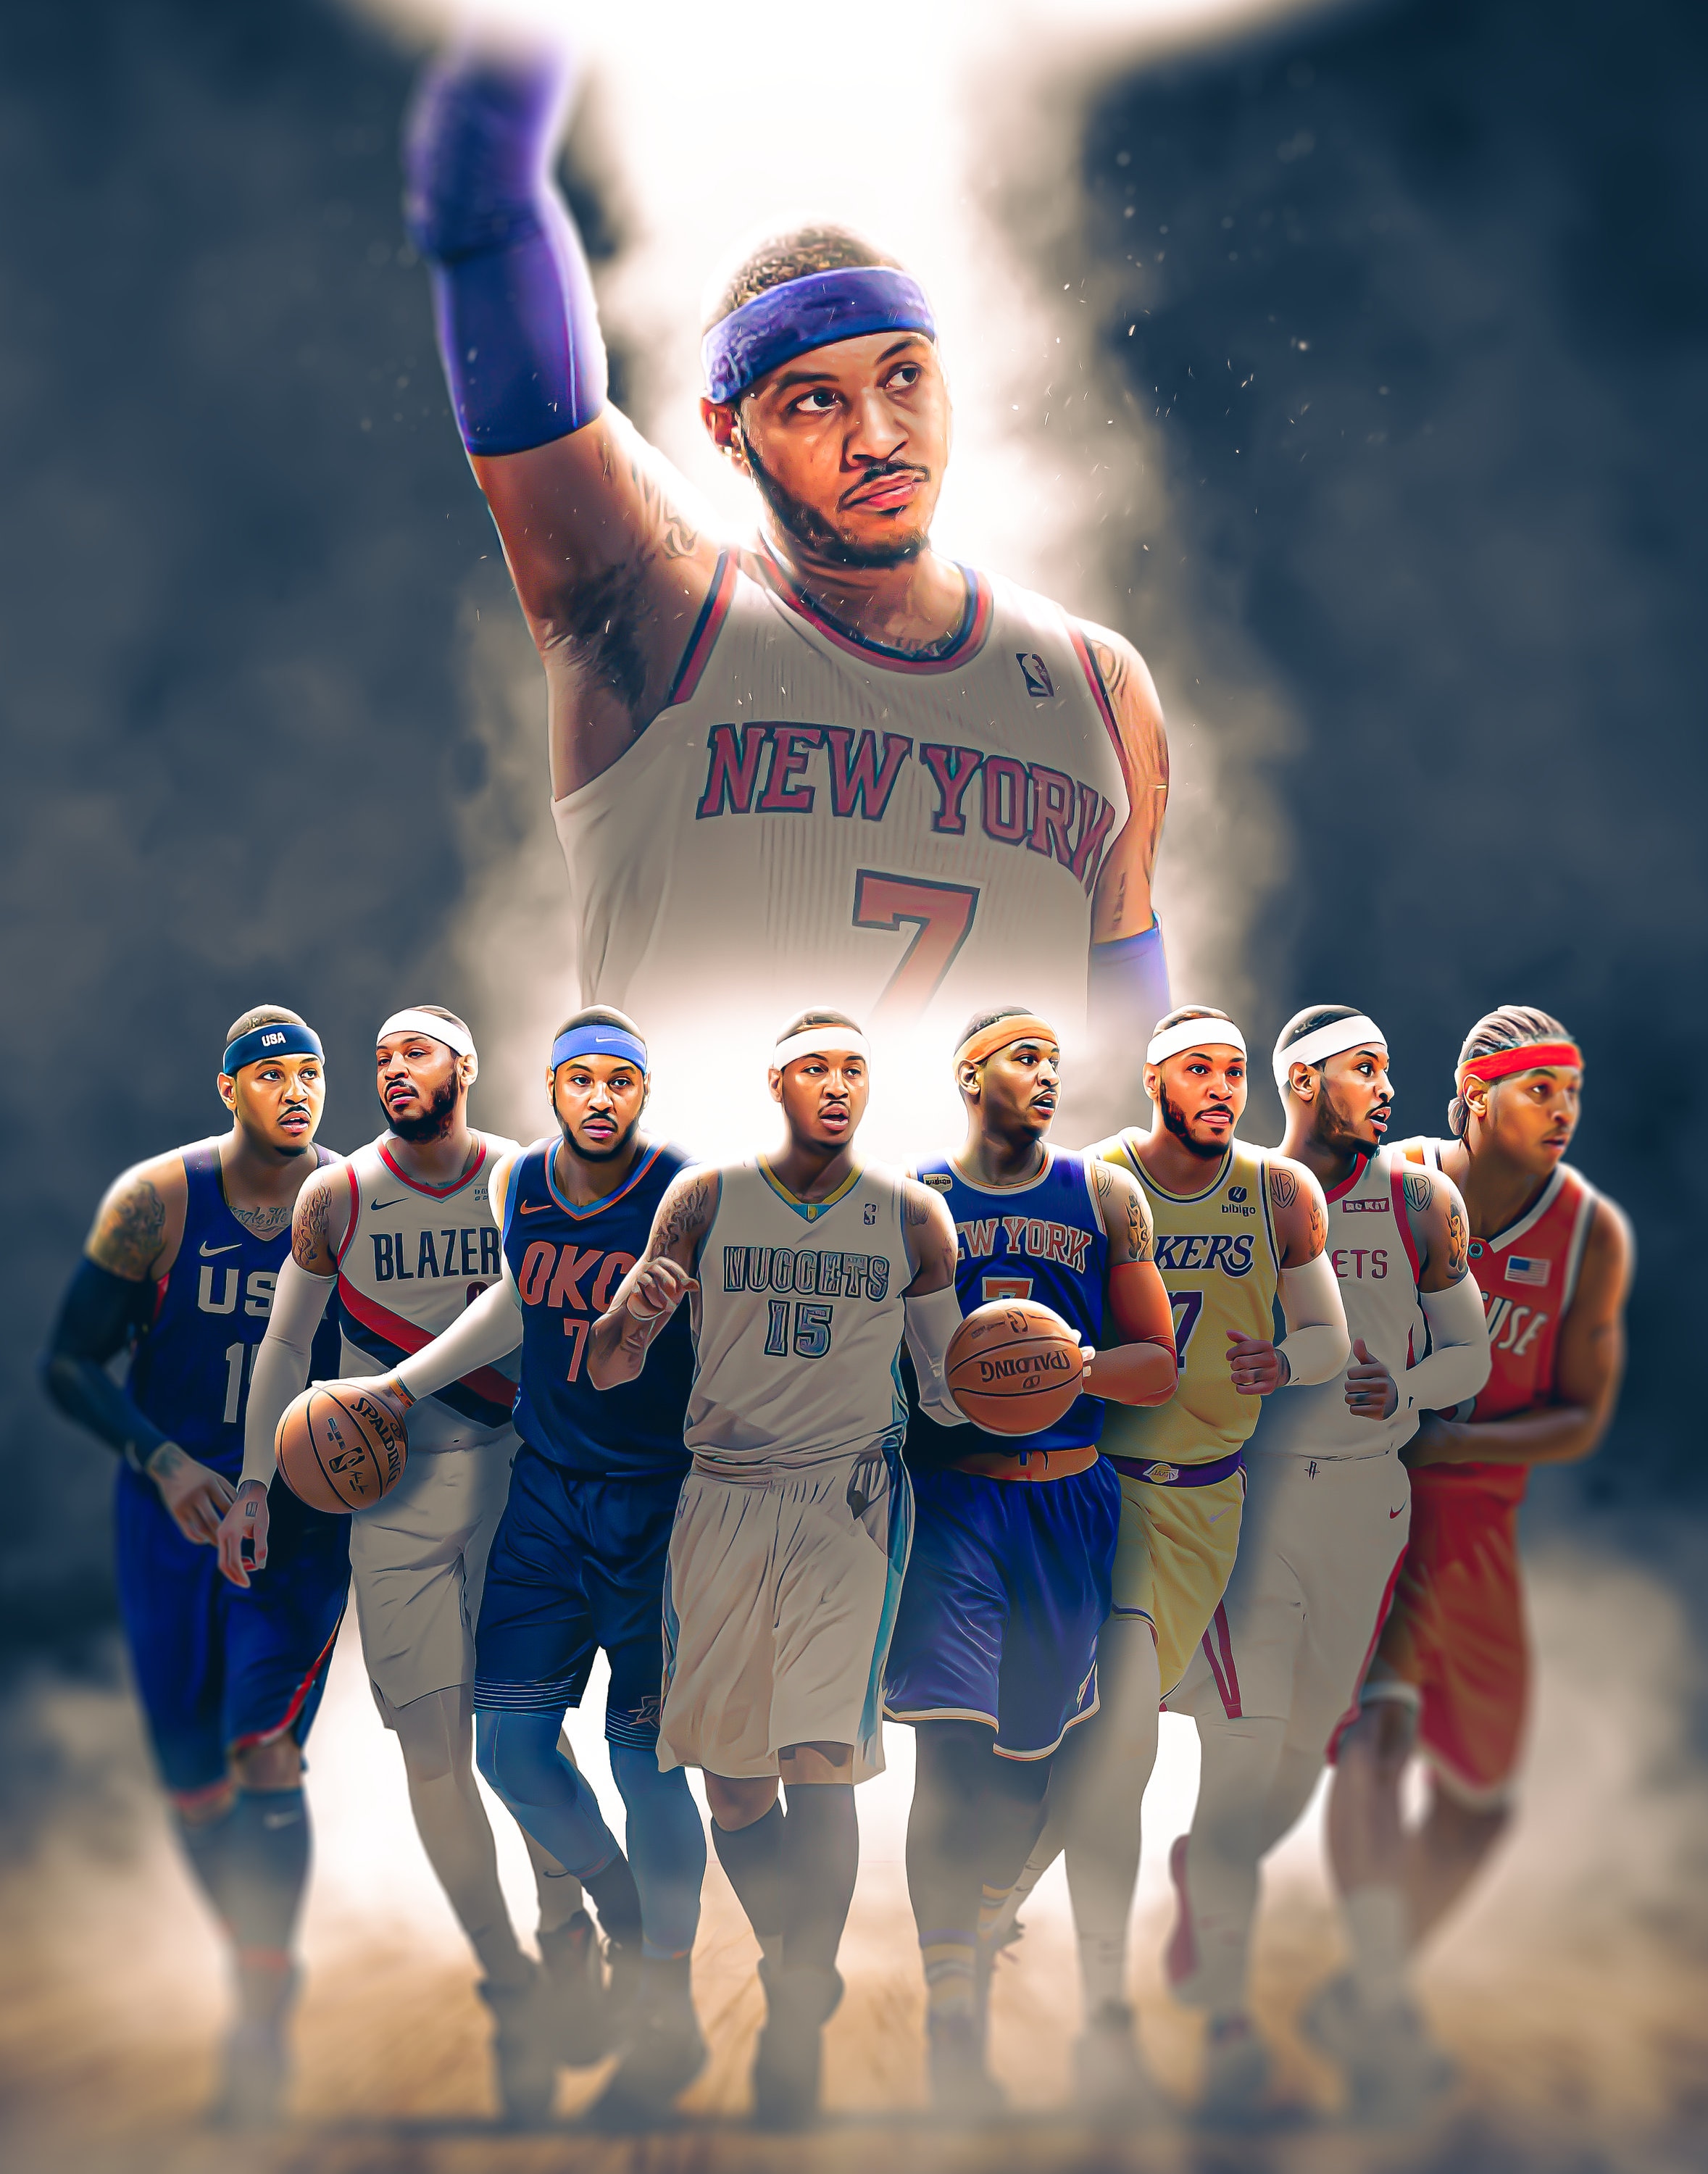 NY Knicks Lithograph print of Knicks all time greats 2020